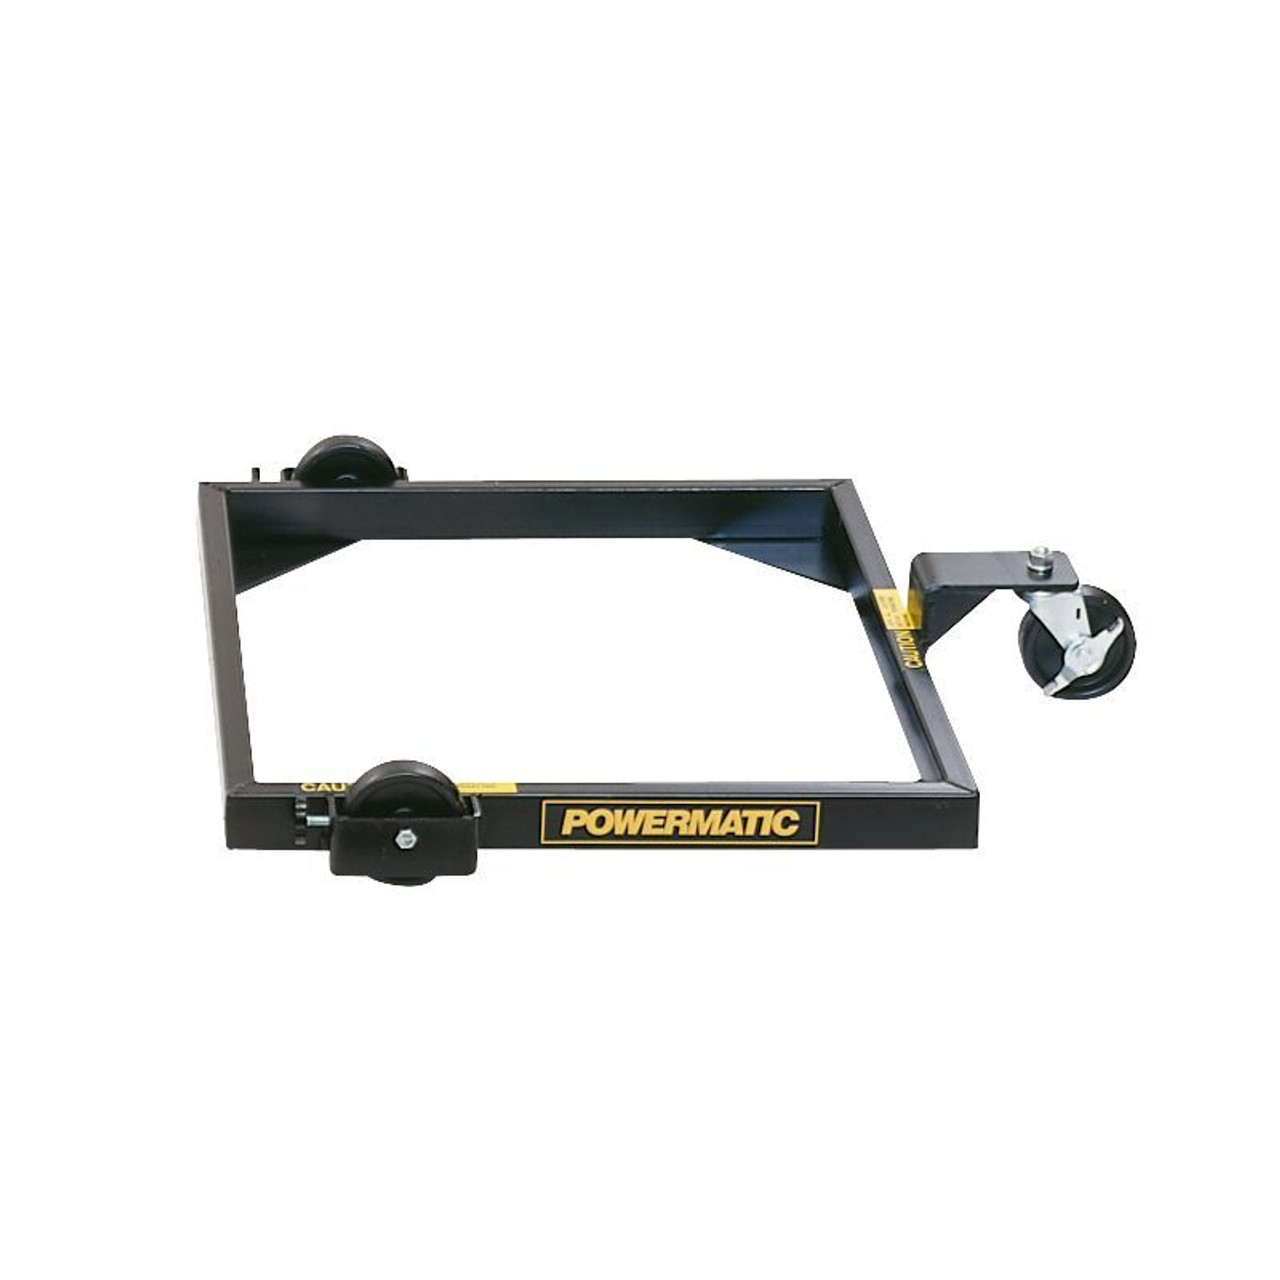 Mobile Base for Jointers - Powermatic 2042374